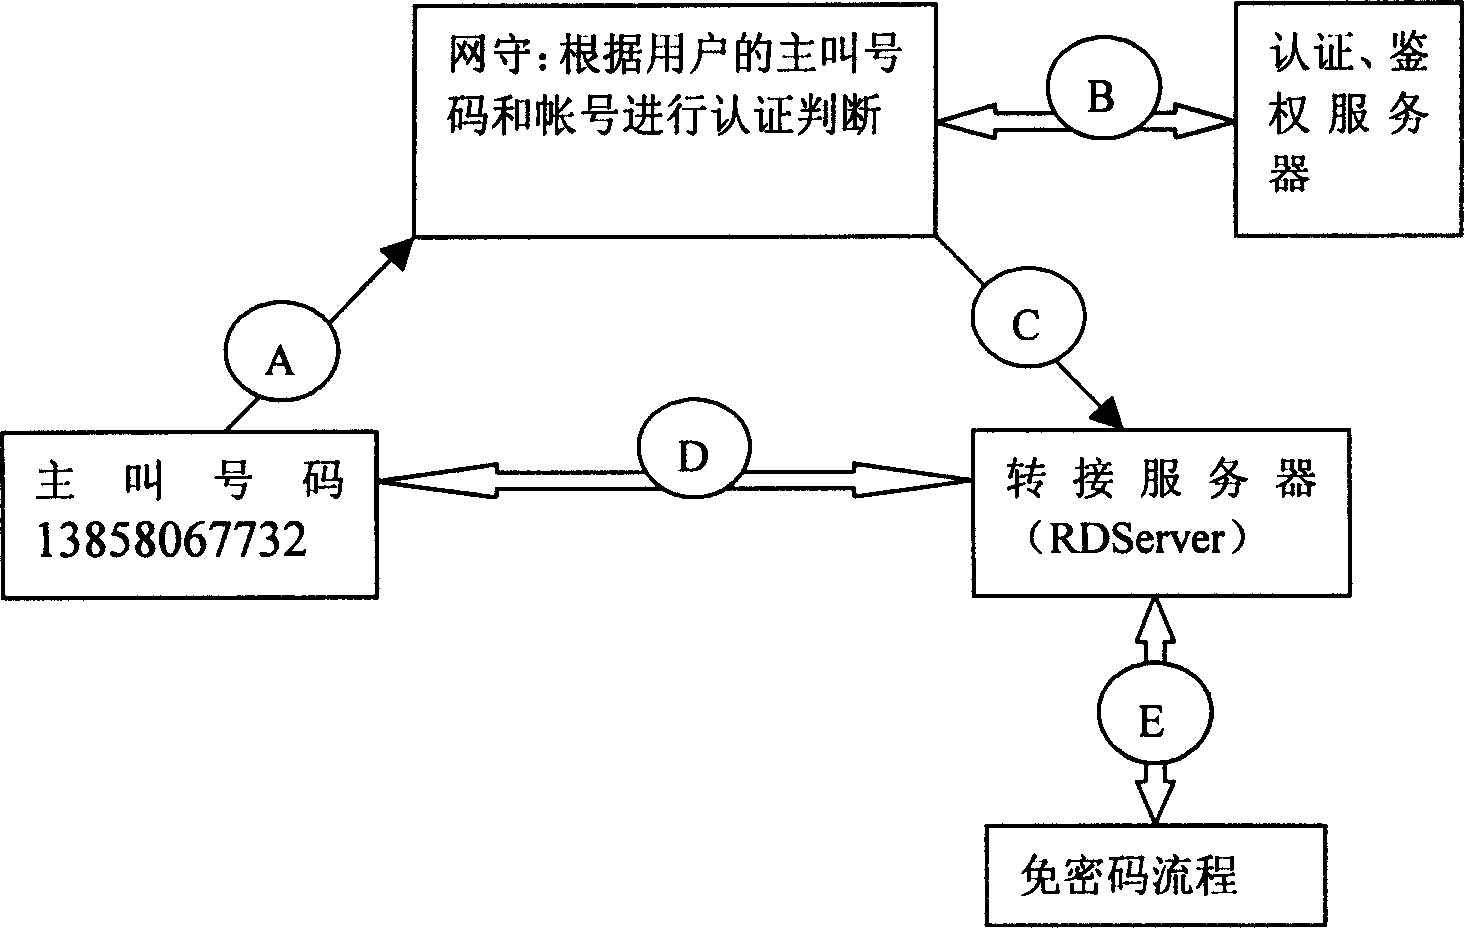 Authentication for dialing number and coding certification combination based on NGN communicating network